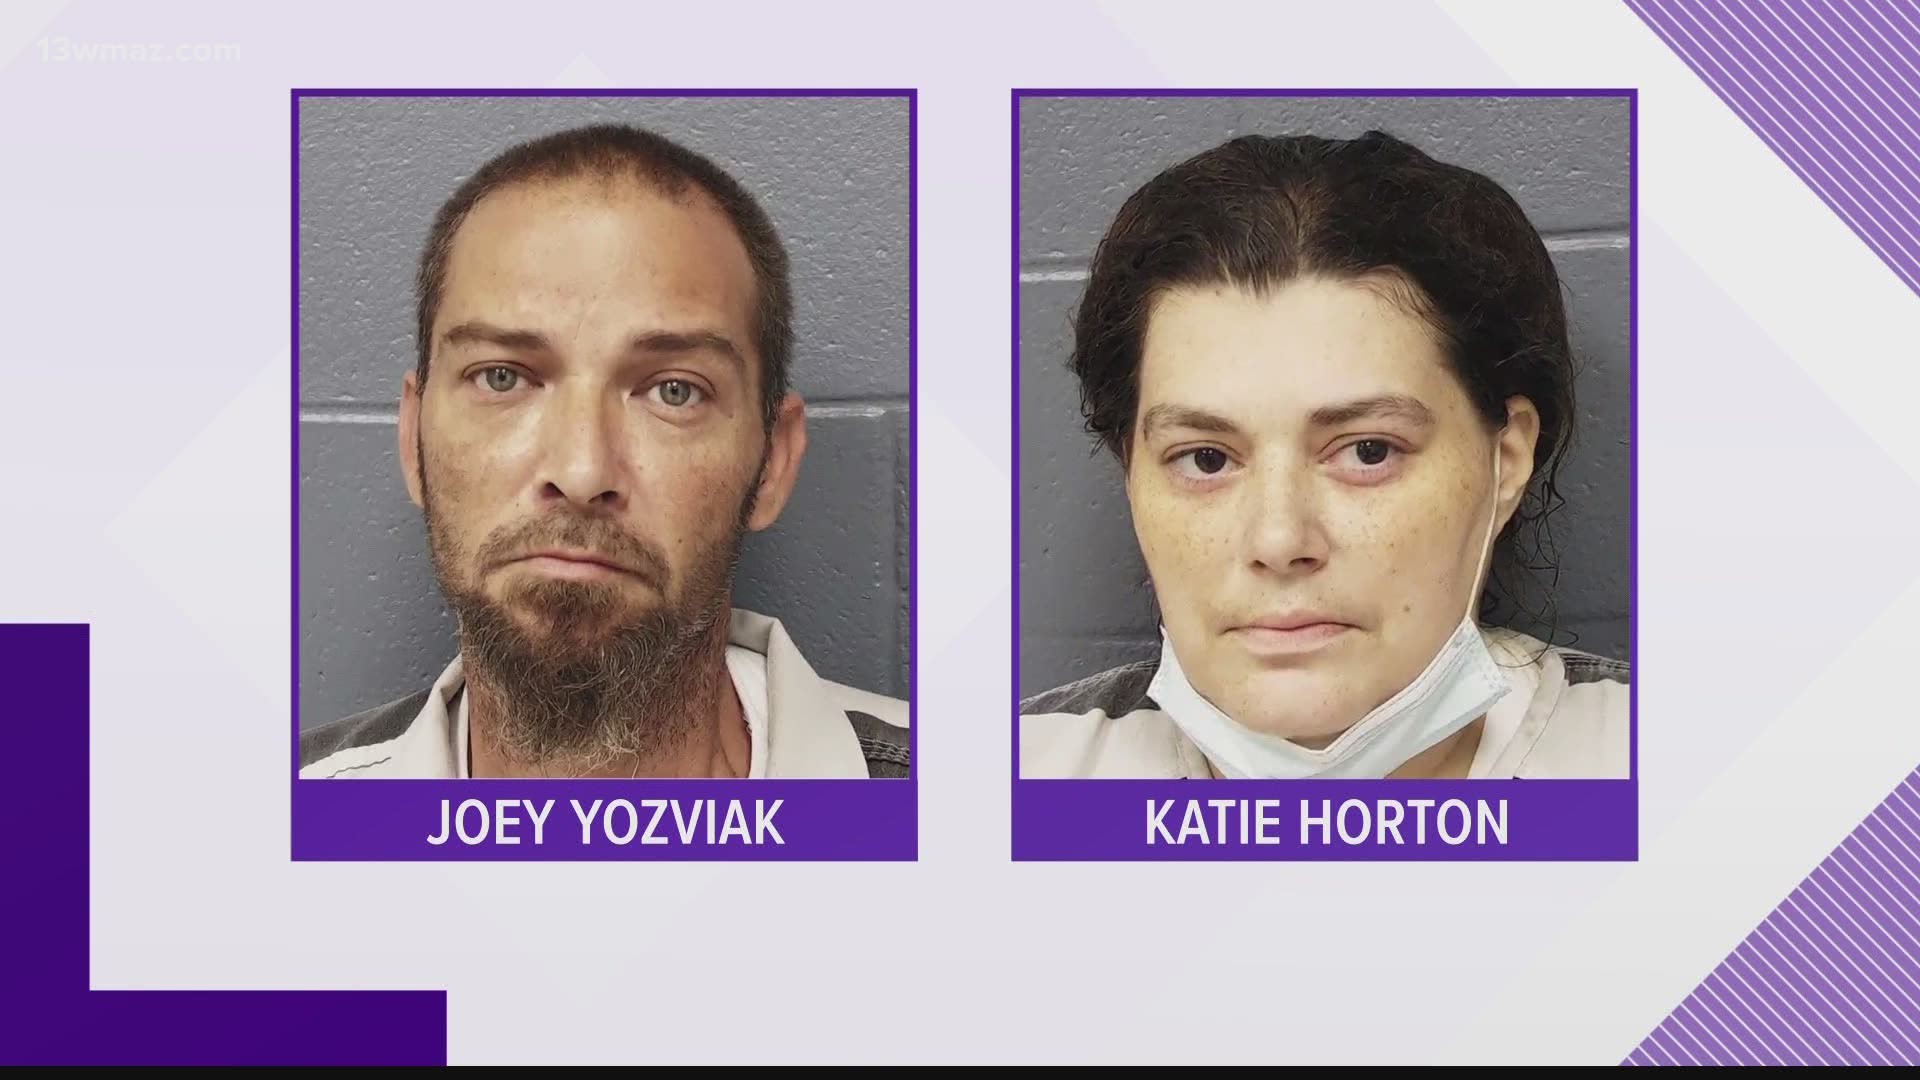 According to a news release, 38-year-old John Joseph Yozviak was arrested around 9:30 a.m. and charged with the murder of Kaitlyn Yozviak.